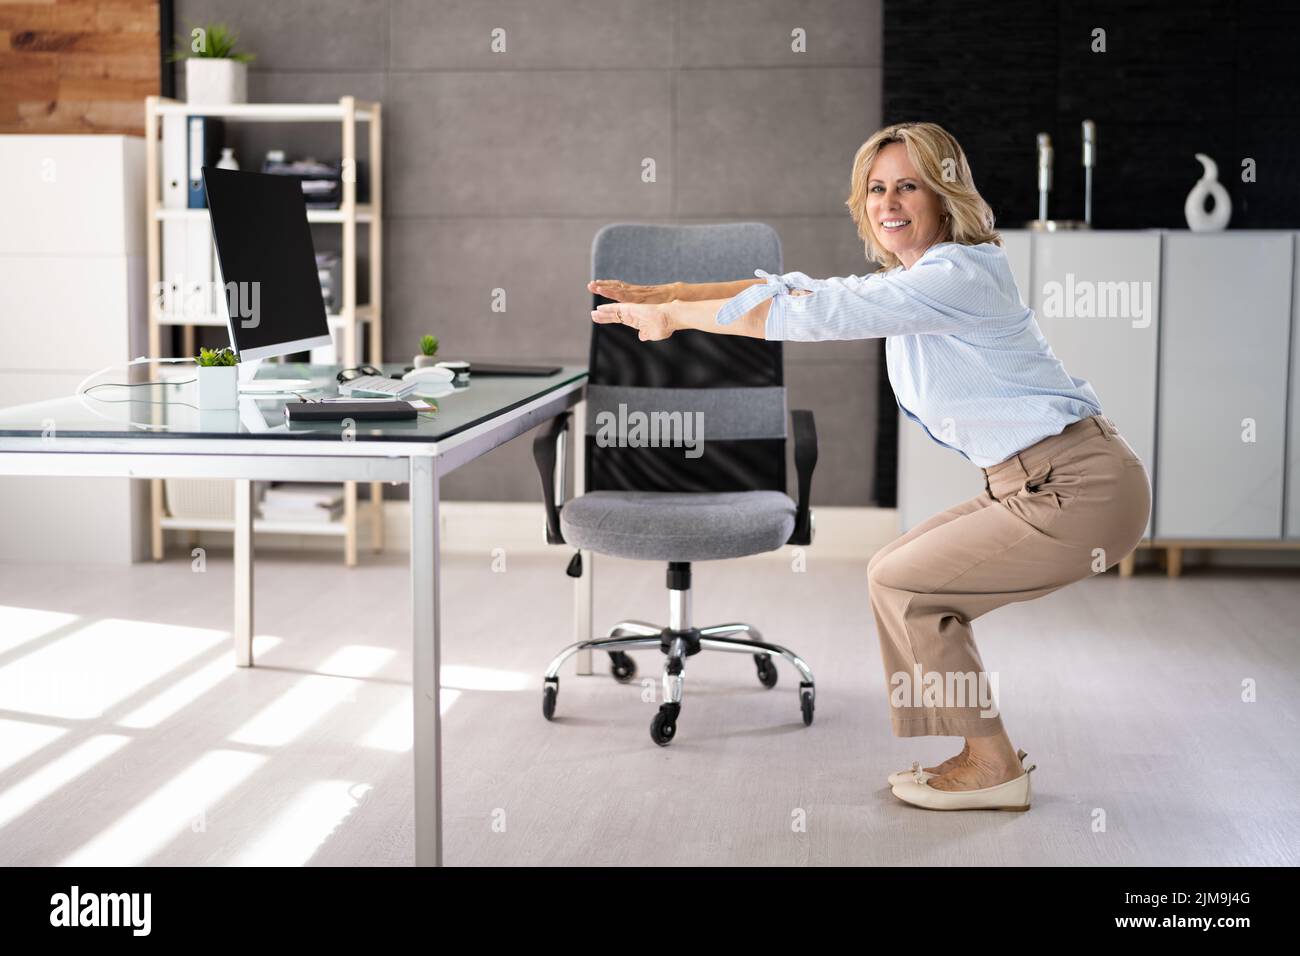 Female Doing Office Yoga Exercise Sit Up And Stretch At Desk Stock Photo